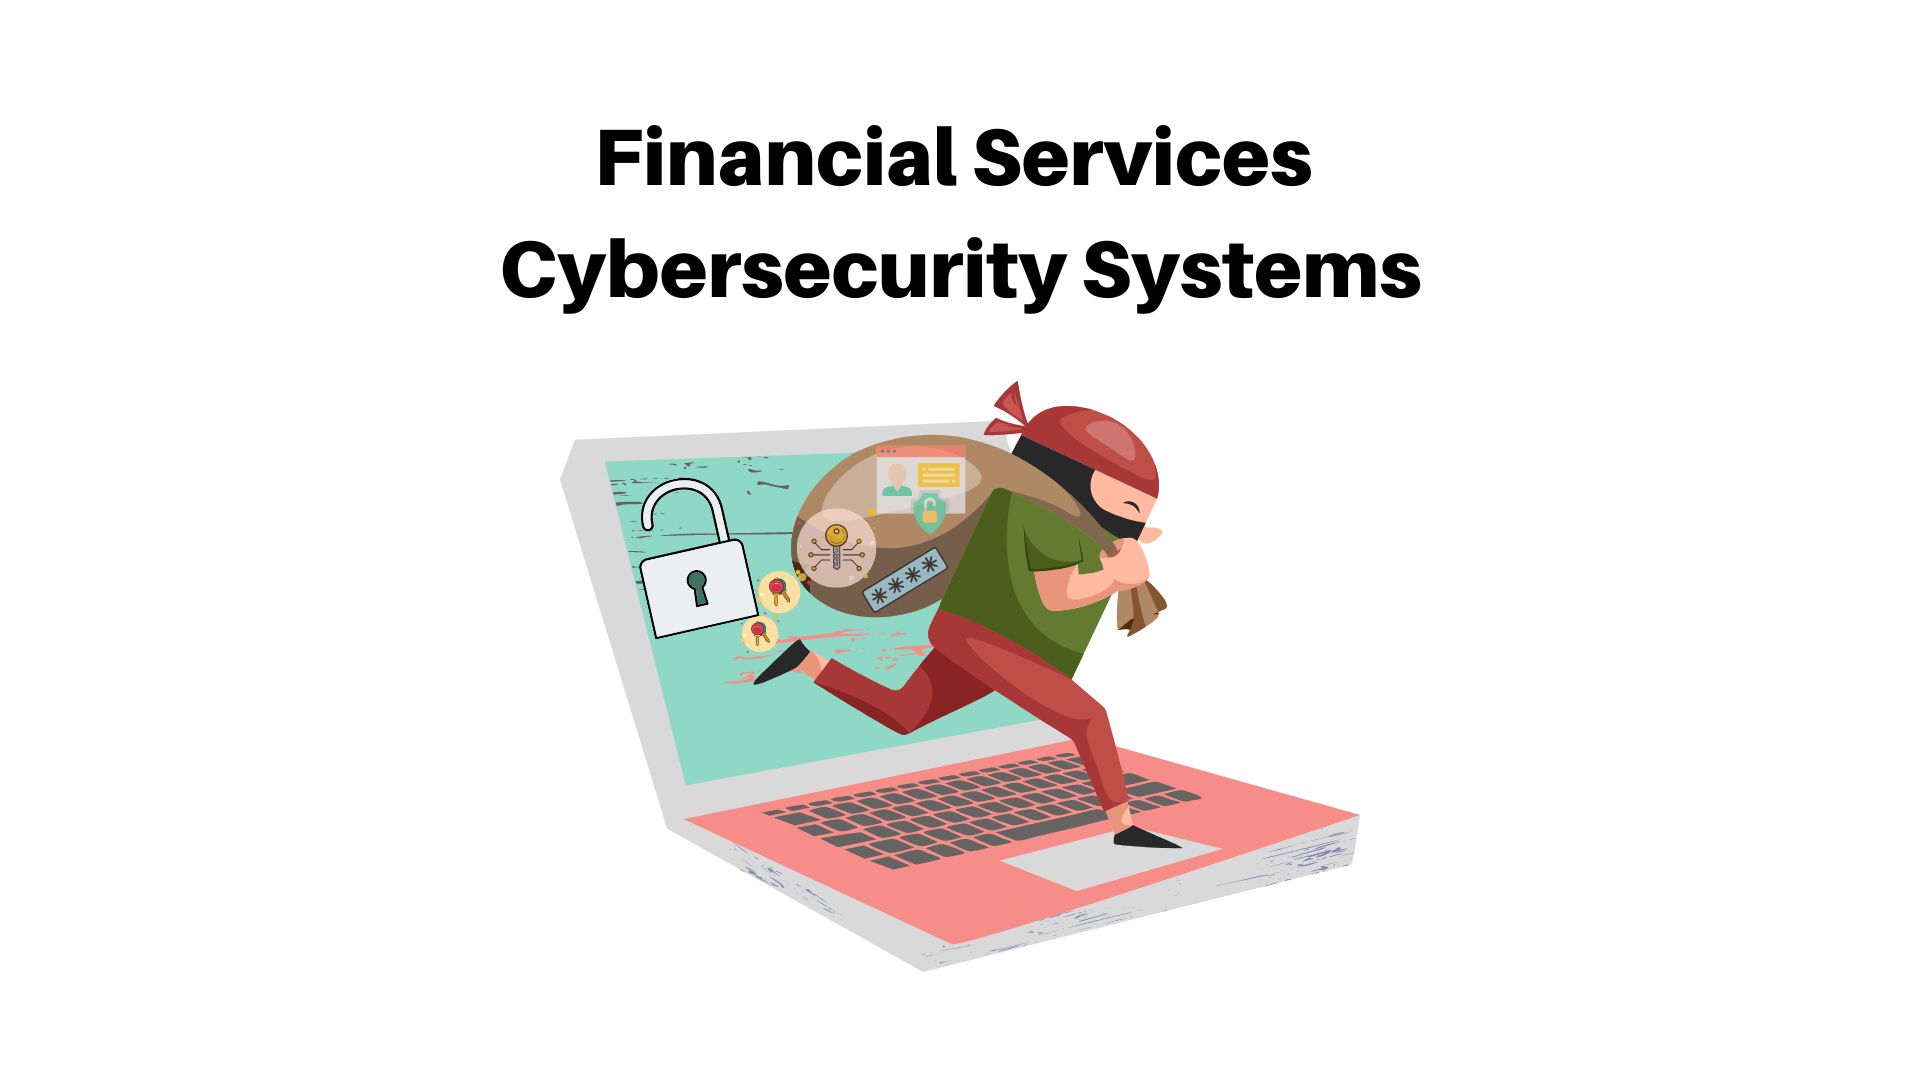 Financial Services Cybersecurity Systems And Services Market Size Worth USD 103.13 Bn by 2033 | CAGR: 14.09%